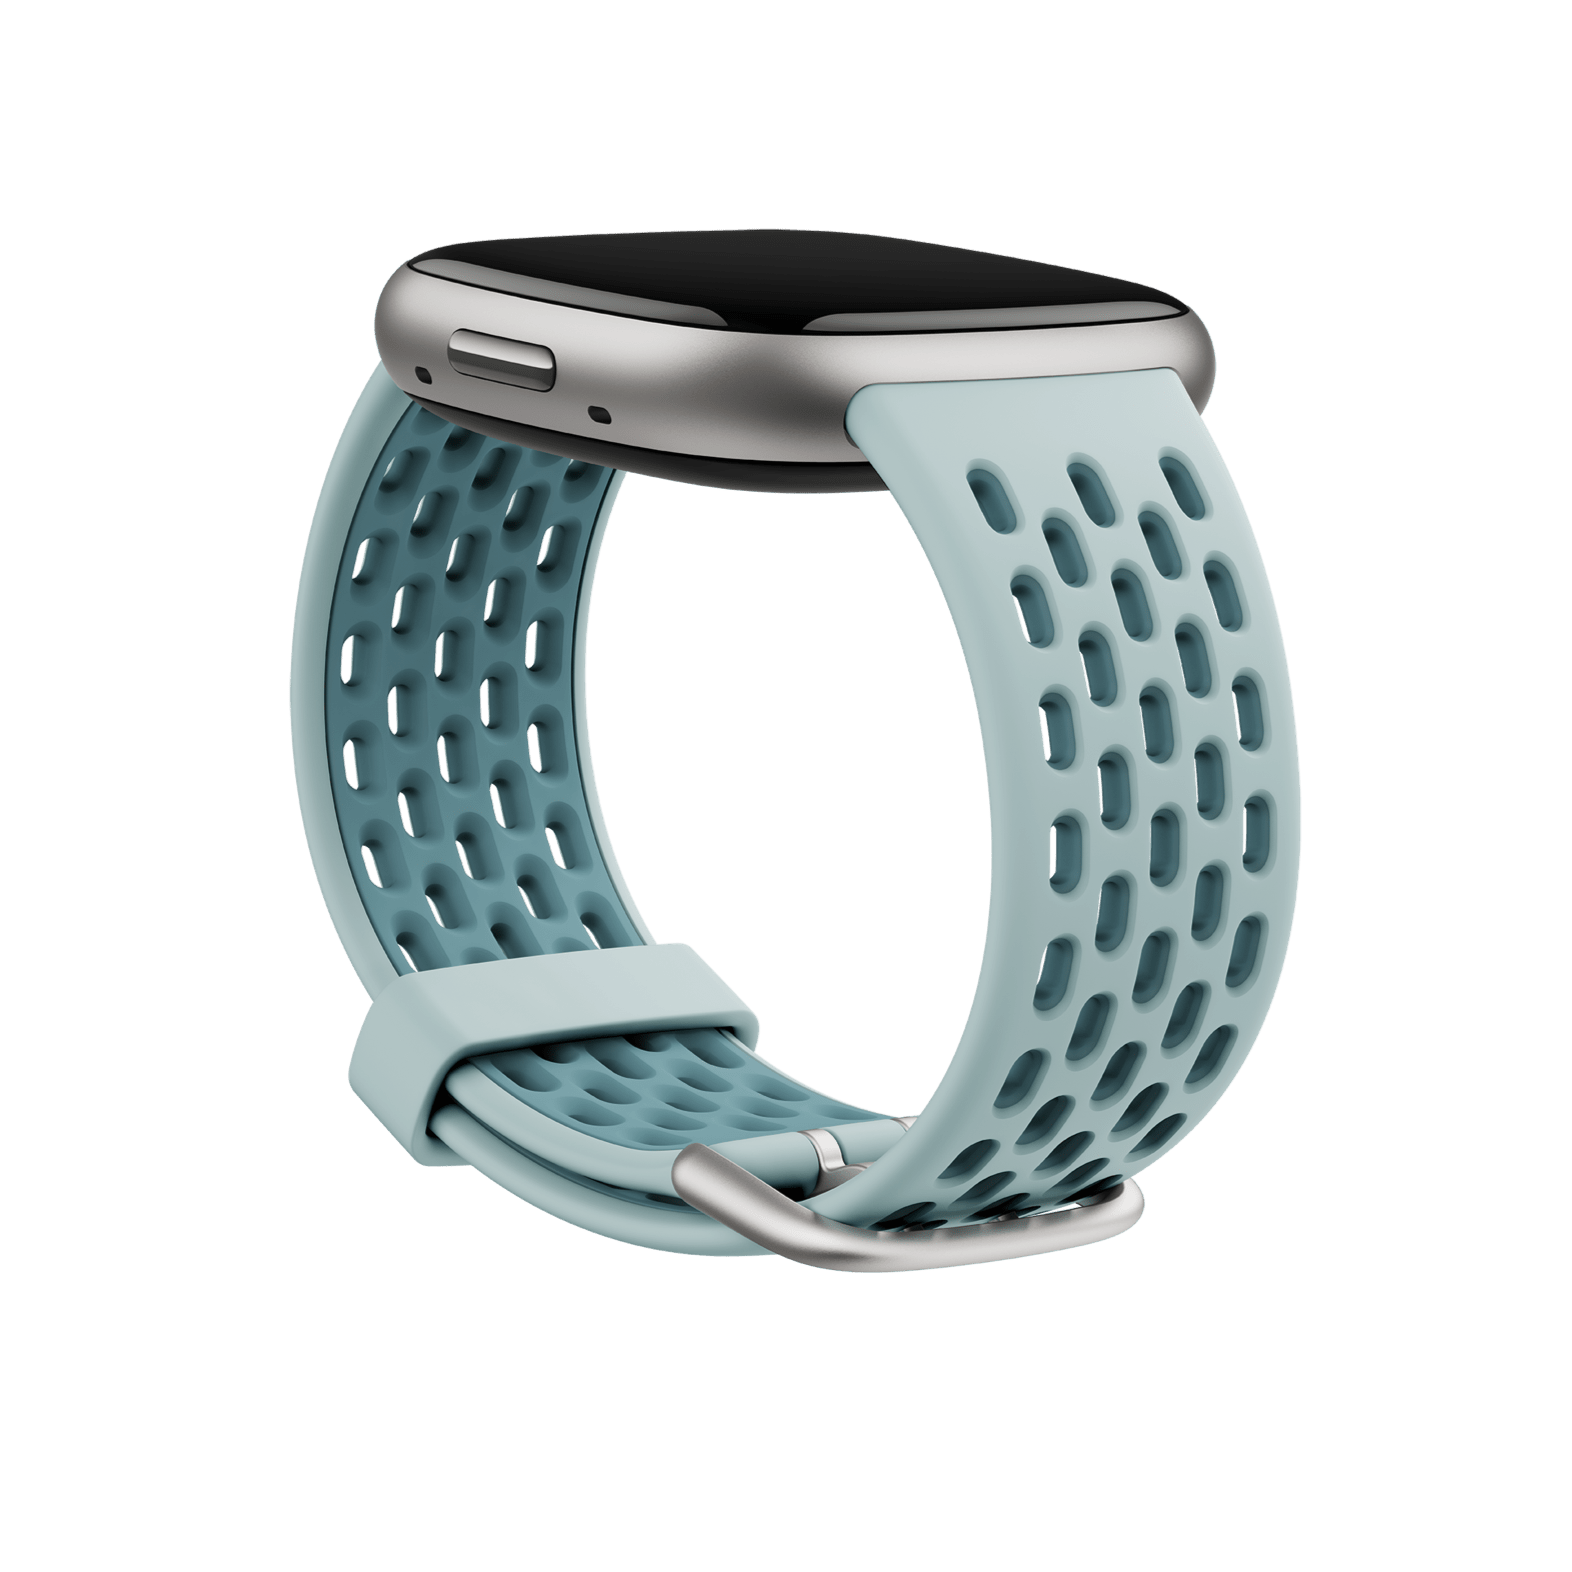 Metal Band Compatible with Fitbit Versa 3 Sense Smartwatch for Women Men Fitbit Sense Bands Adjustable Stainless Steel Mesh Wristband Bracelet Straps with Unique Magnet Lock for Versa 3 